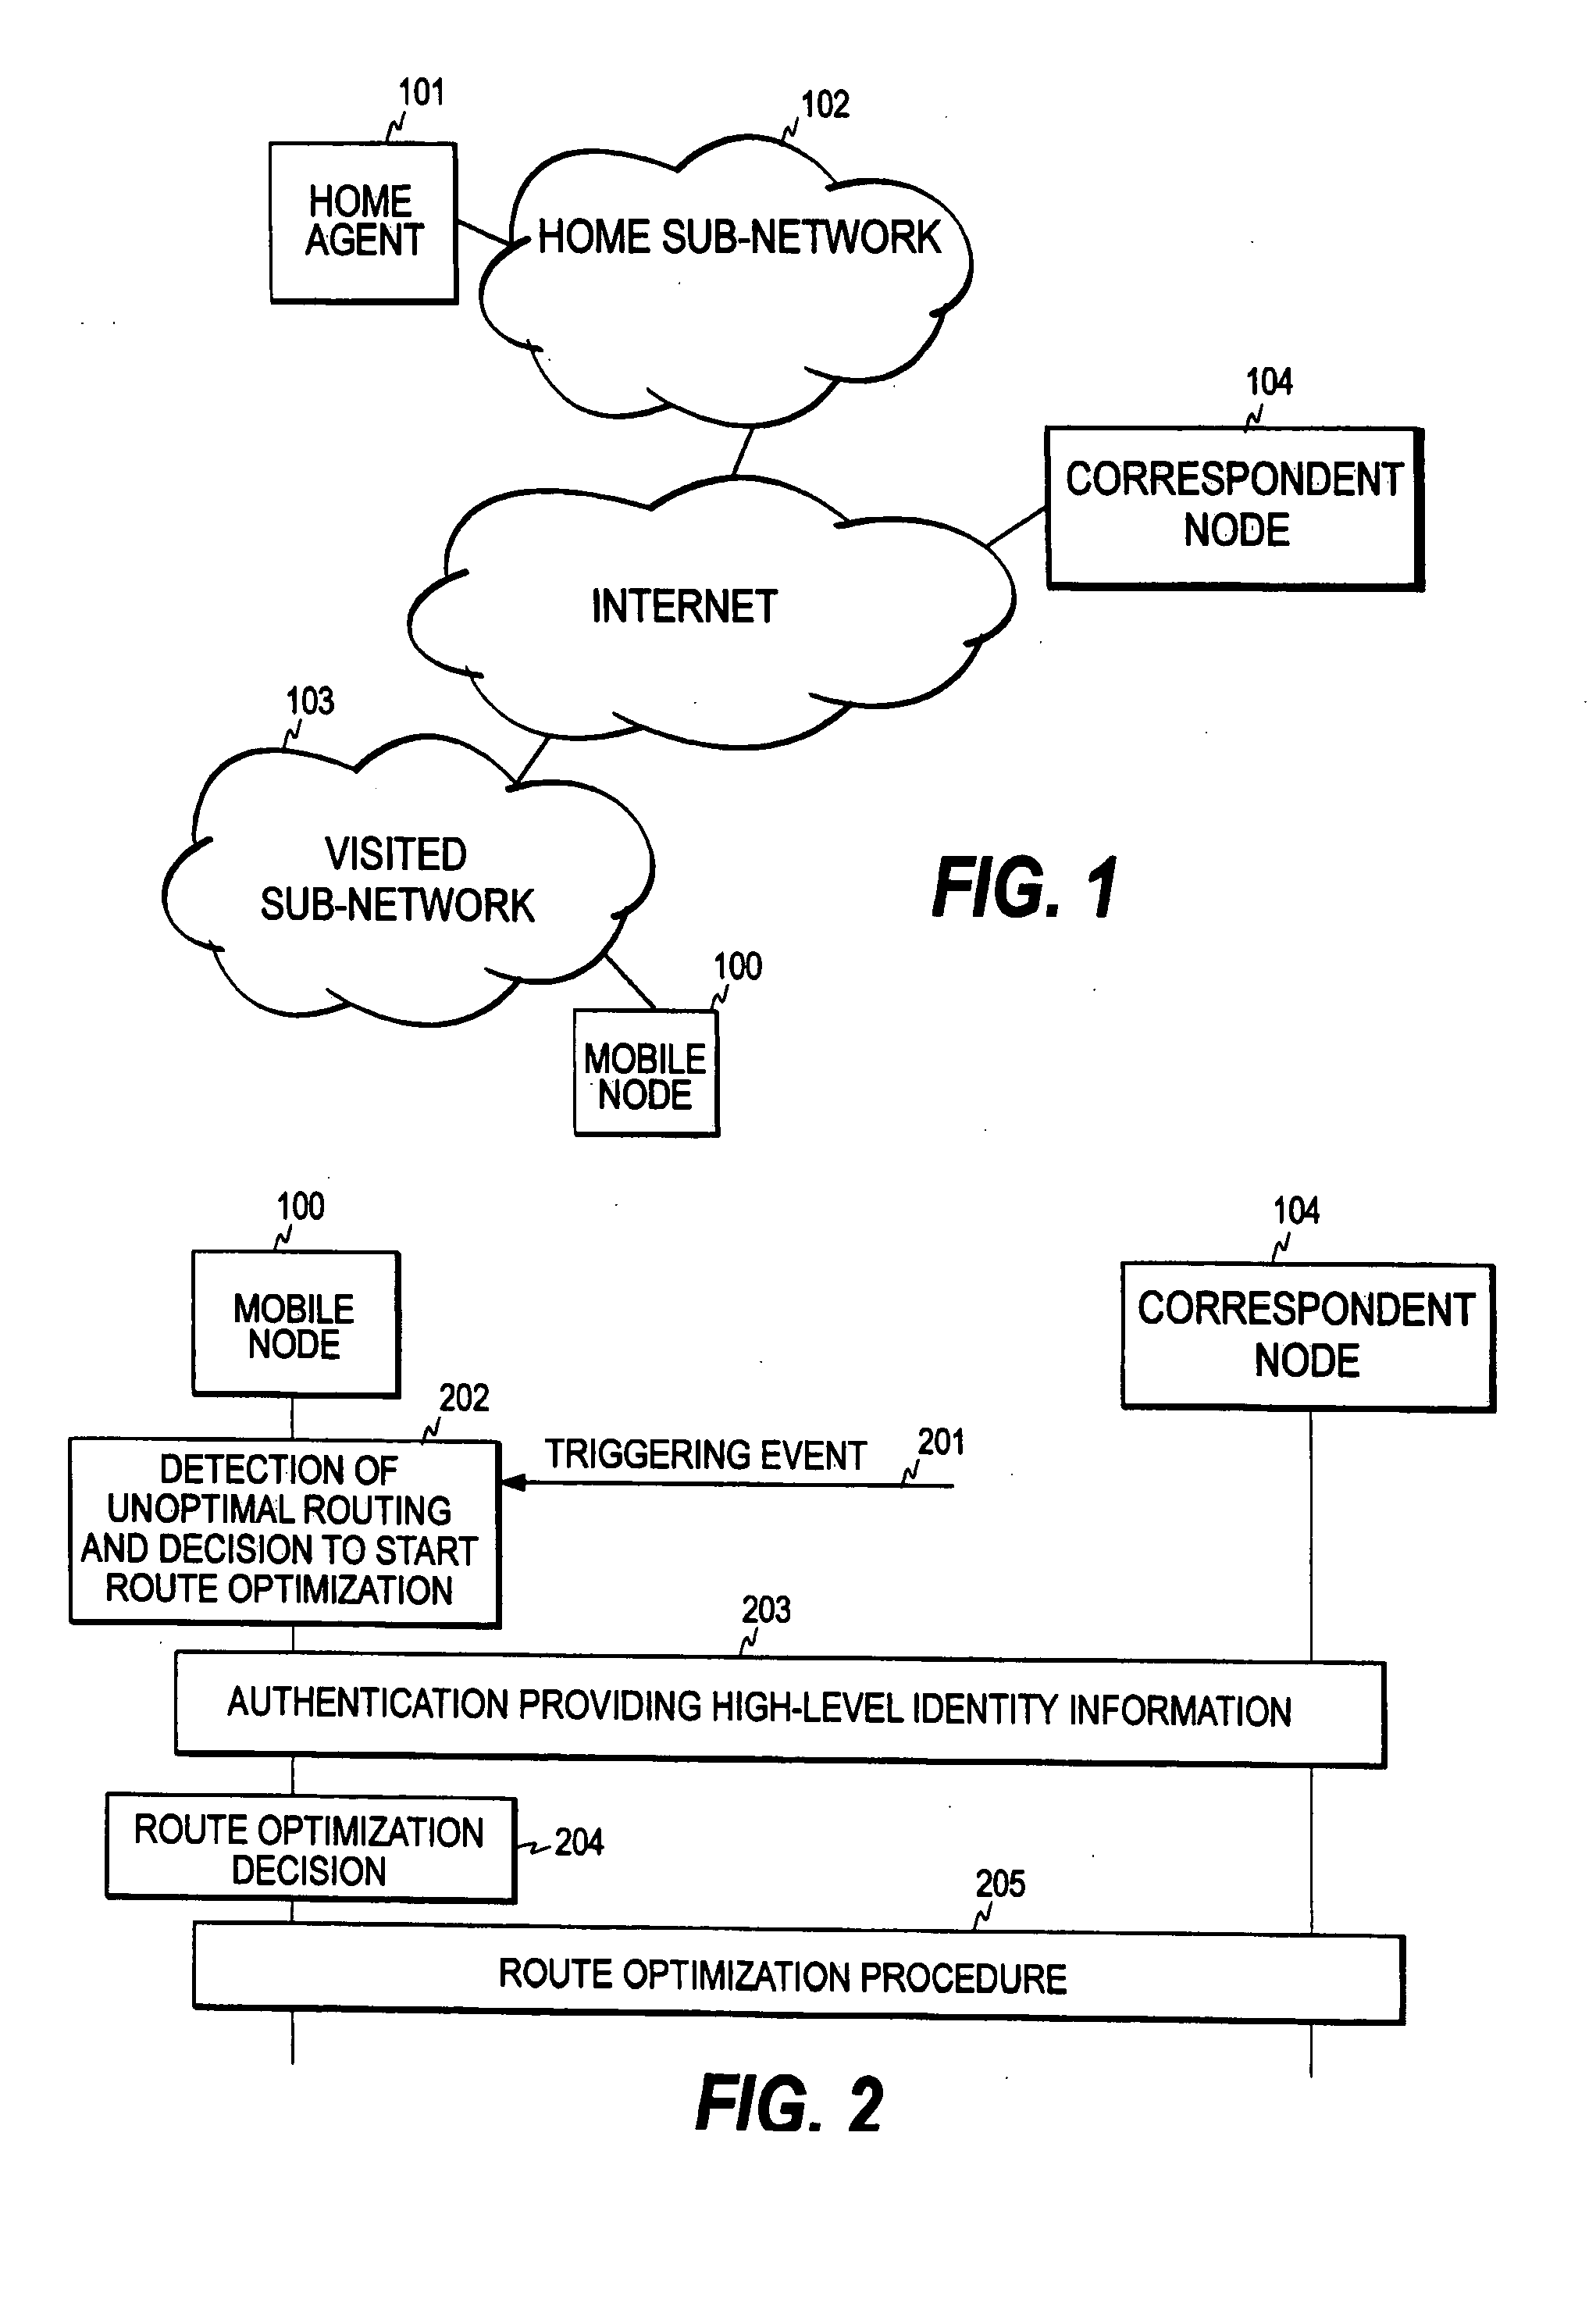 Location privacy in a communication system